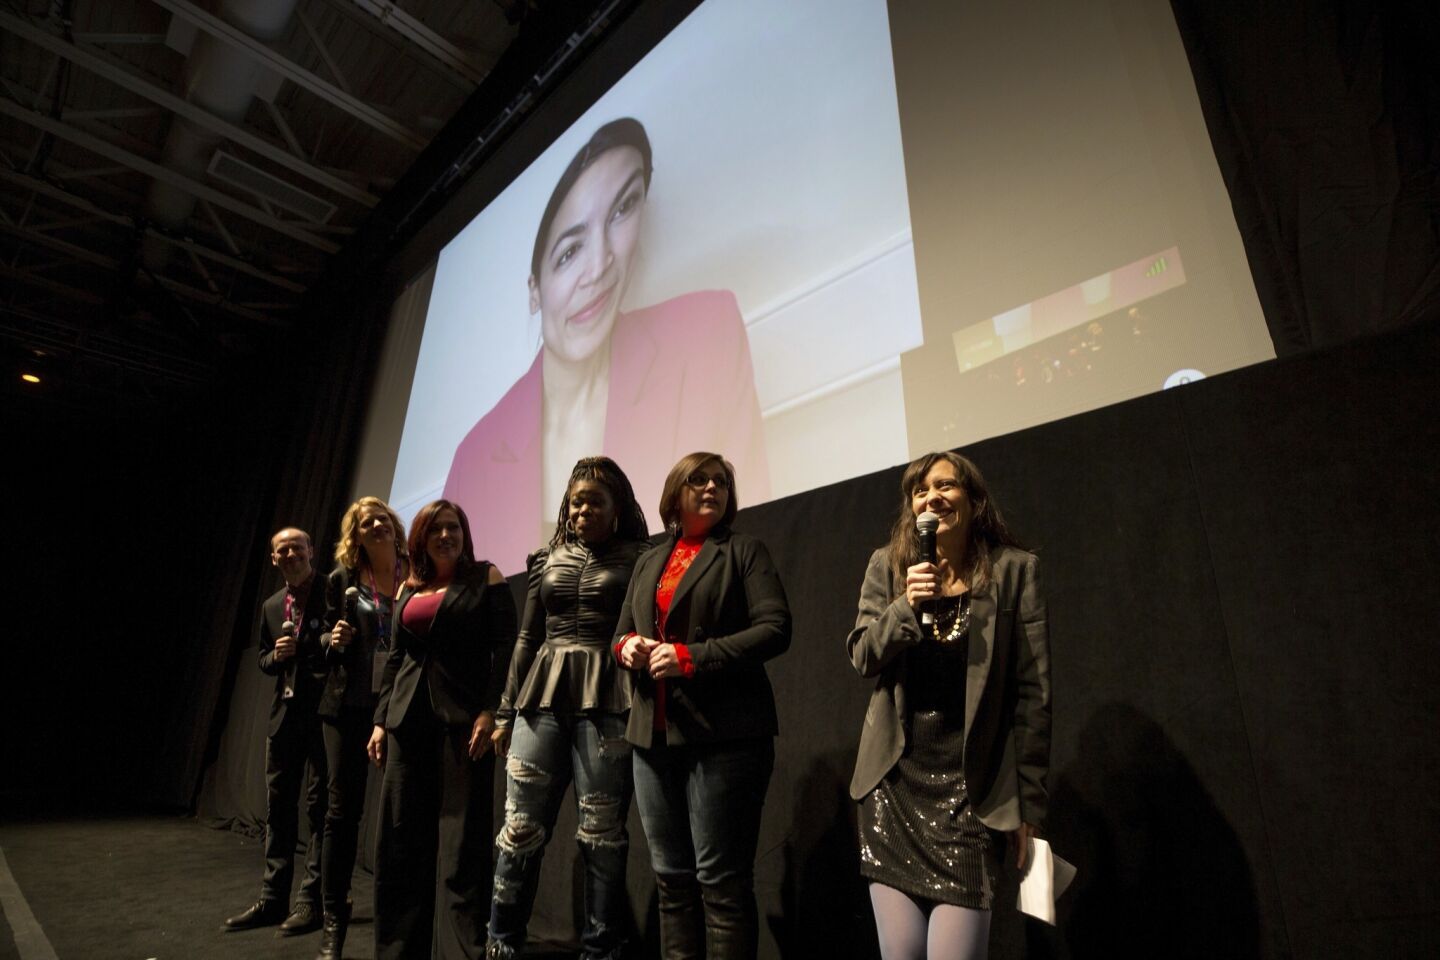 Filmmaker Rachel Lears, right, introduces Rep. Alexandria Ocasio-Cortez (D-N.Y.) via video conference for a Q&A session along with the other subjects of "Knock Down the House." The documentary’s Sundance premiere took place Sunday at the MARC theater, followed by the Q&A.